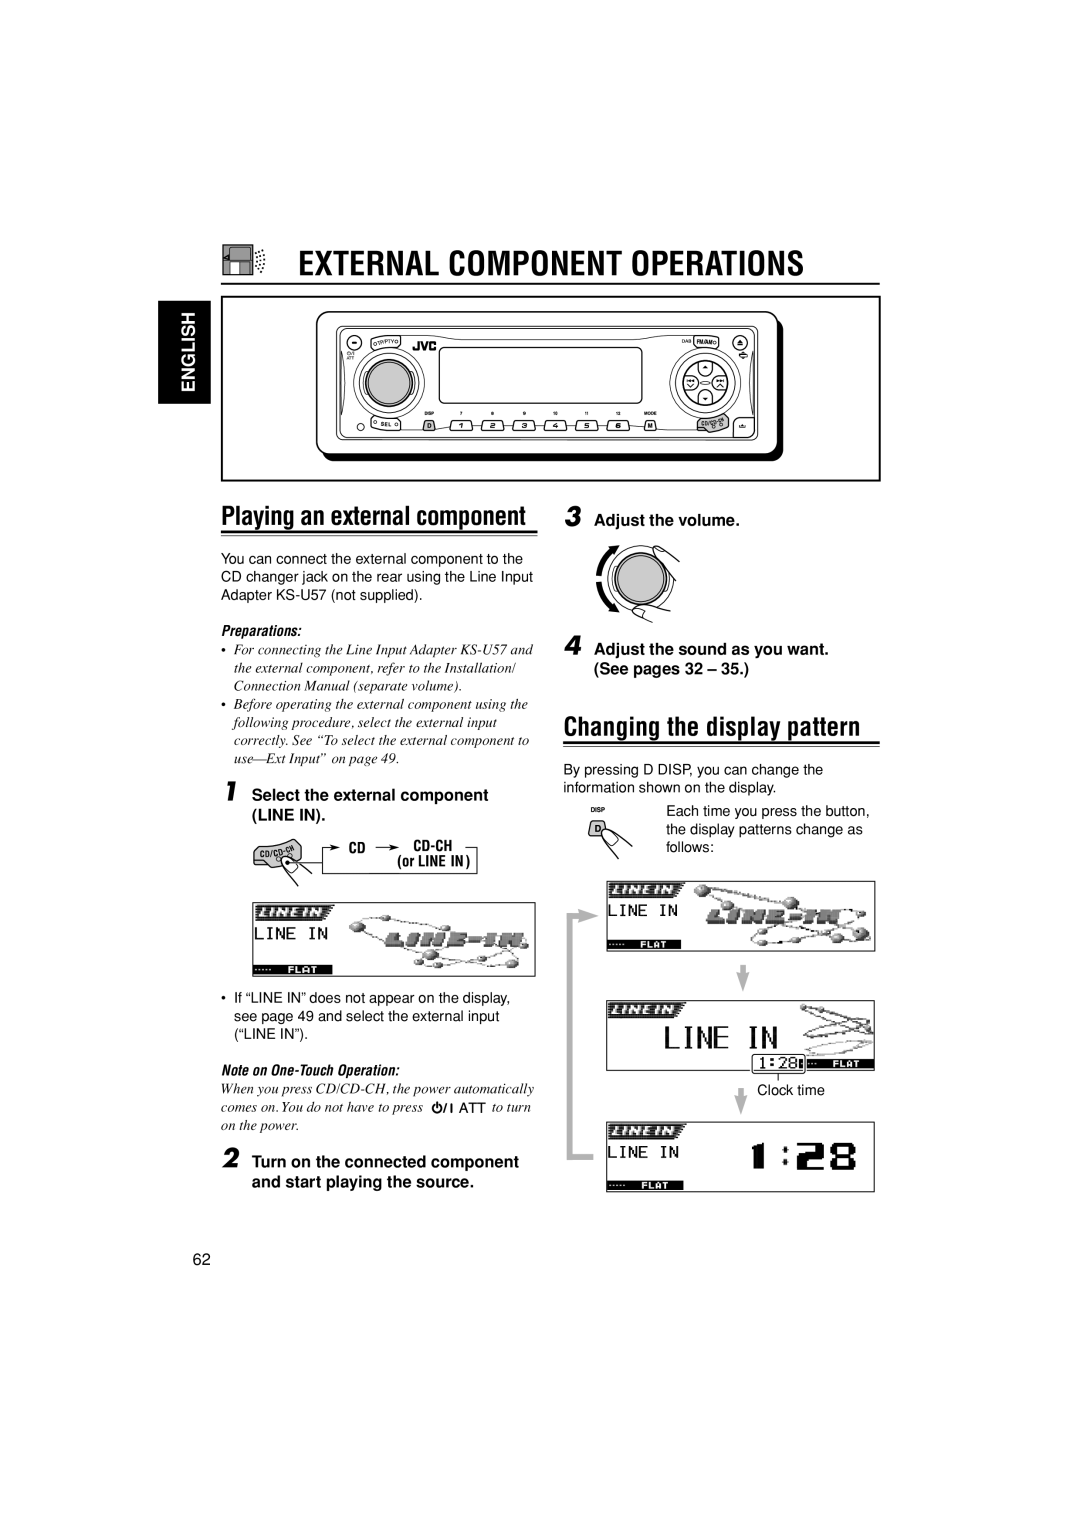 JVC KD-LH401 External Component Operations, Changing the display pattern, Playing an external component, English 